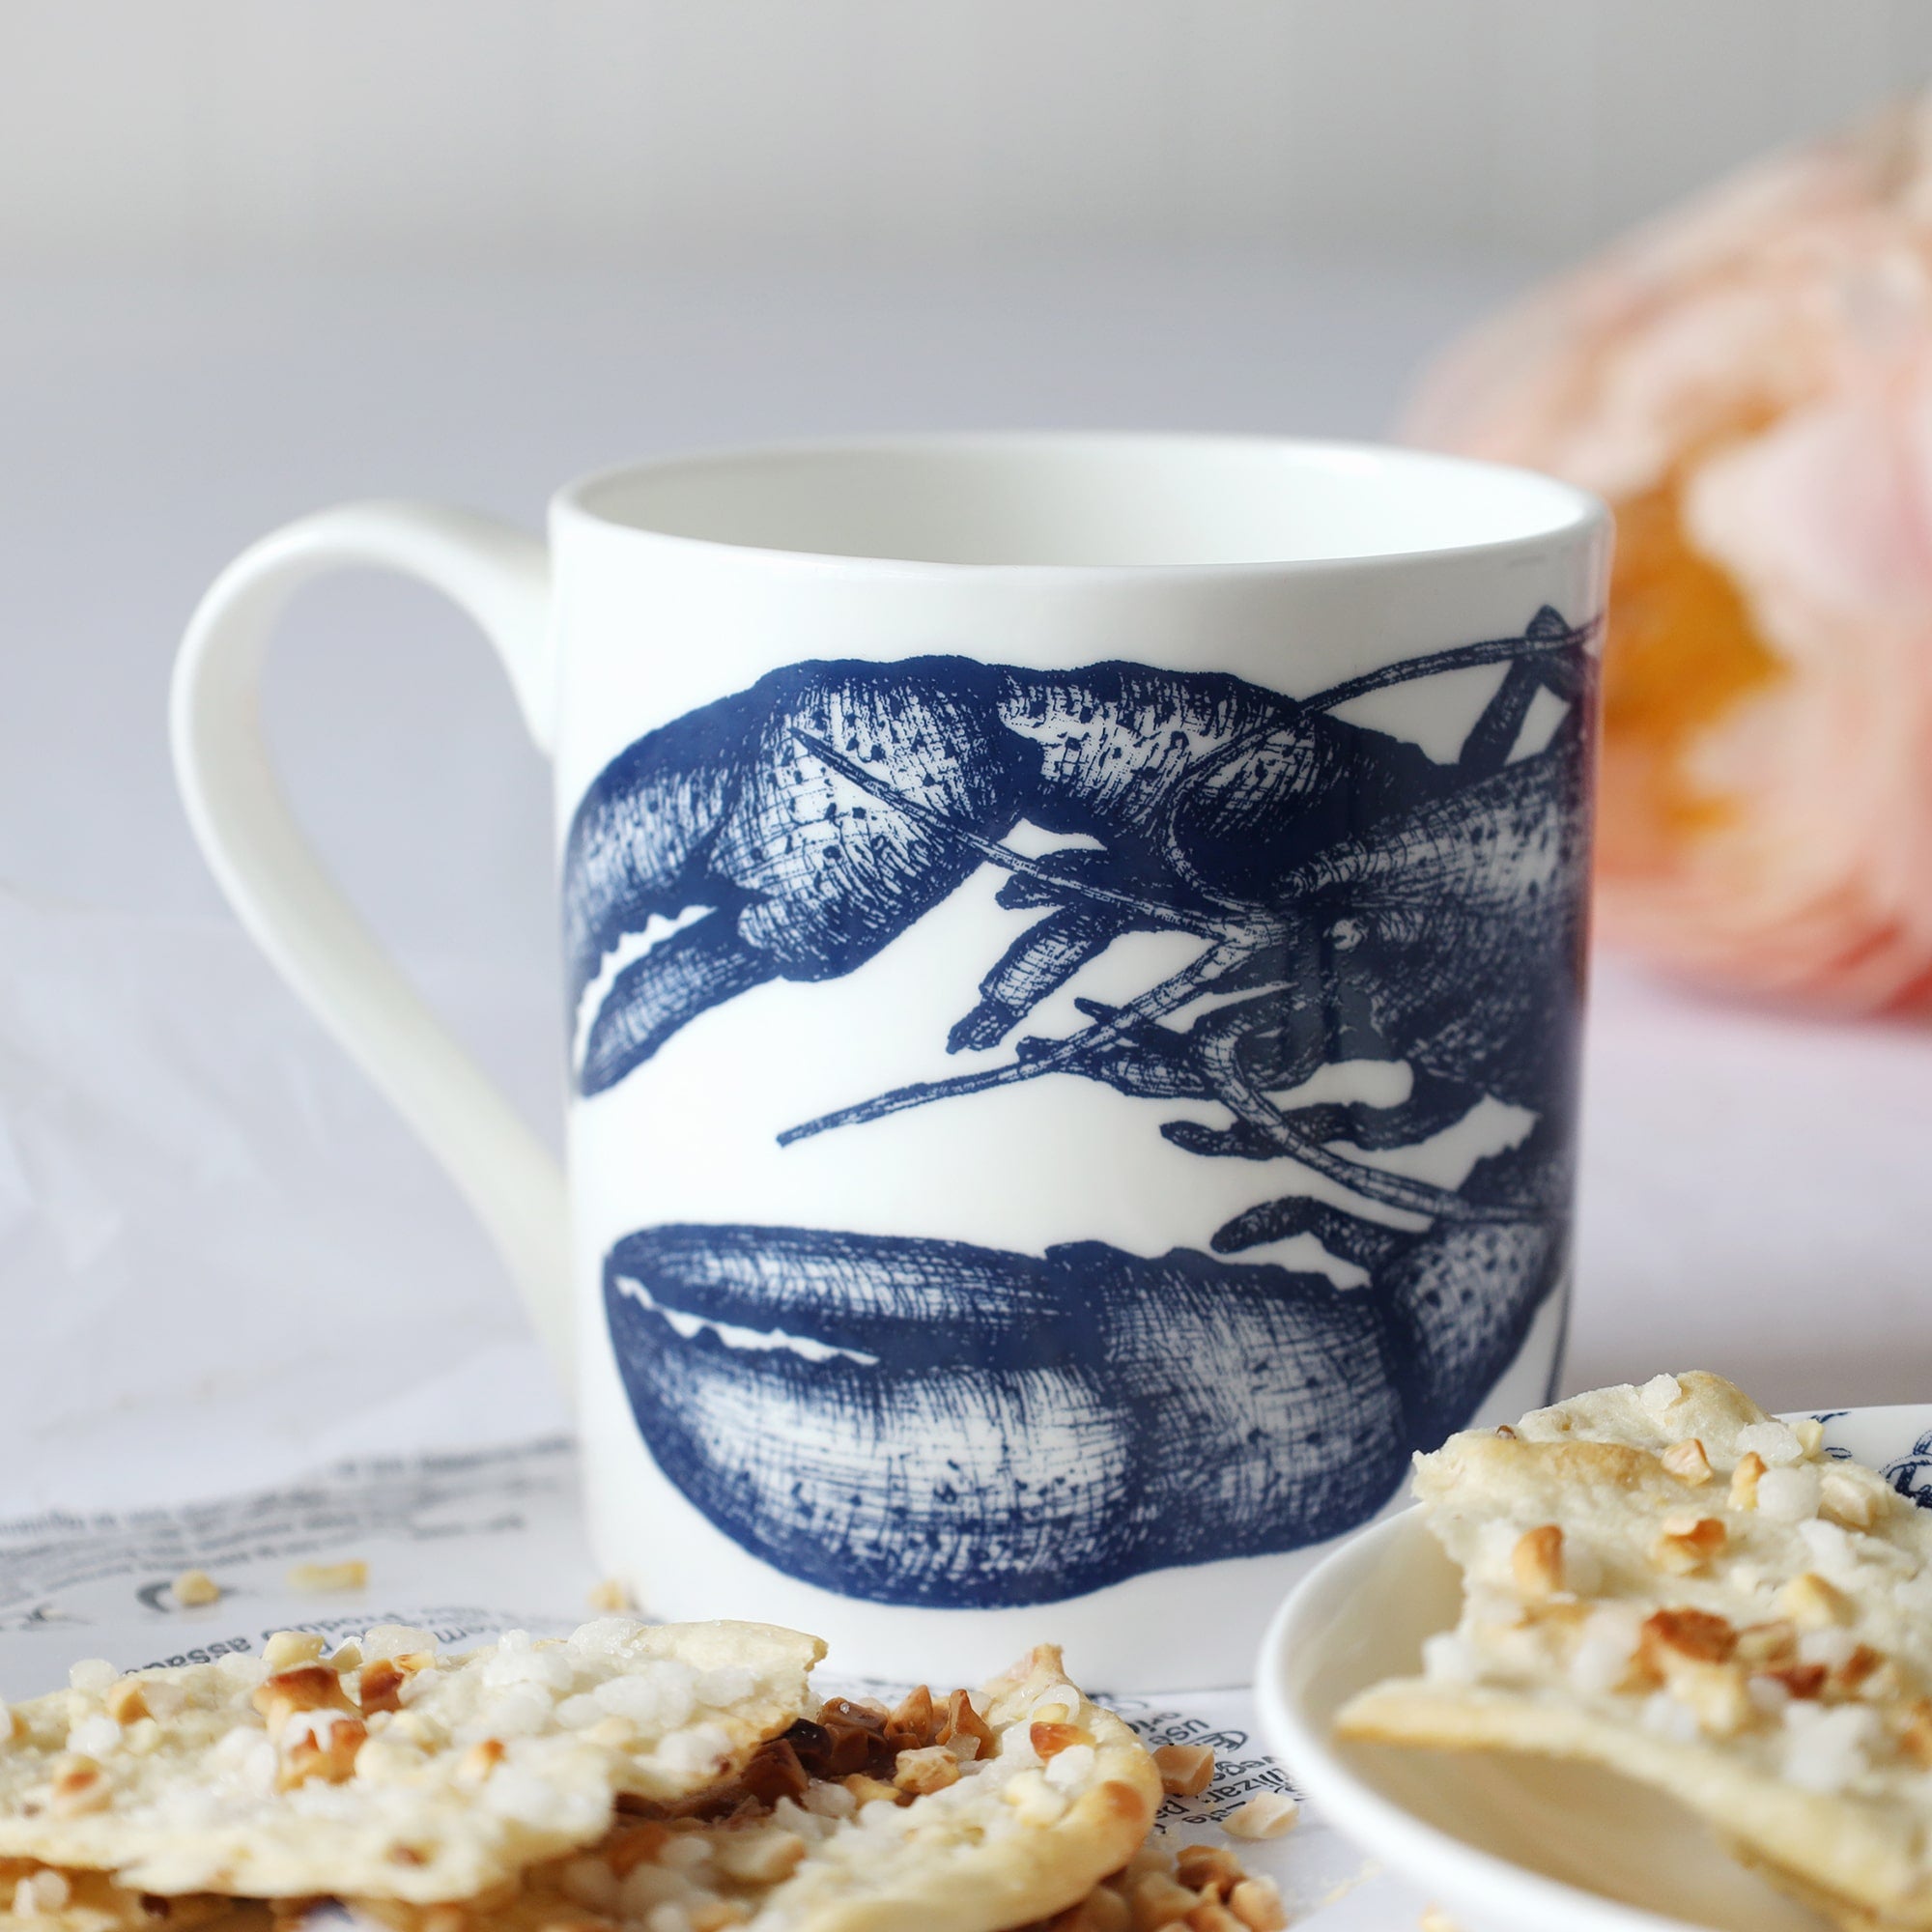 A white bone china mug with a beautiful dark blue illustrated lobster that runs around the middle sitting on a table with biscuits in front and out of focus flowers in the background.